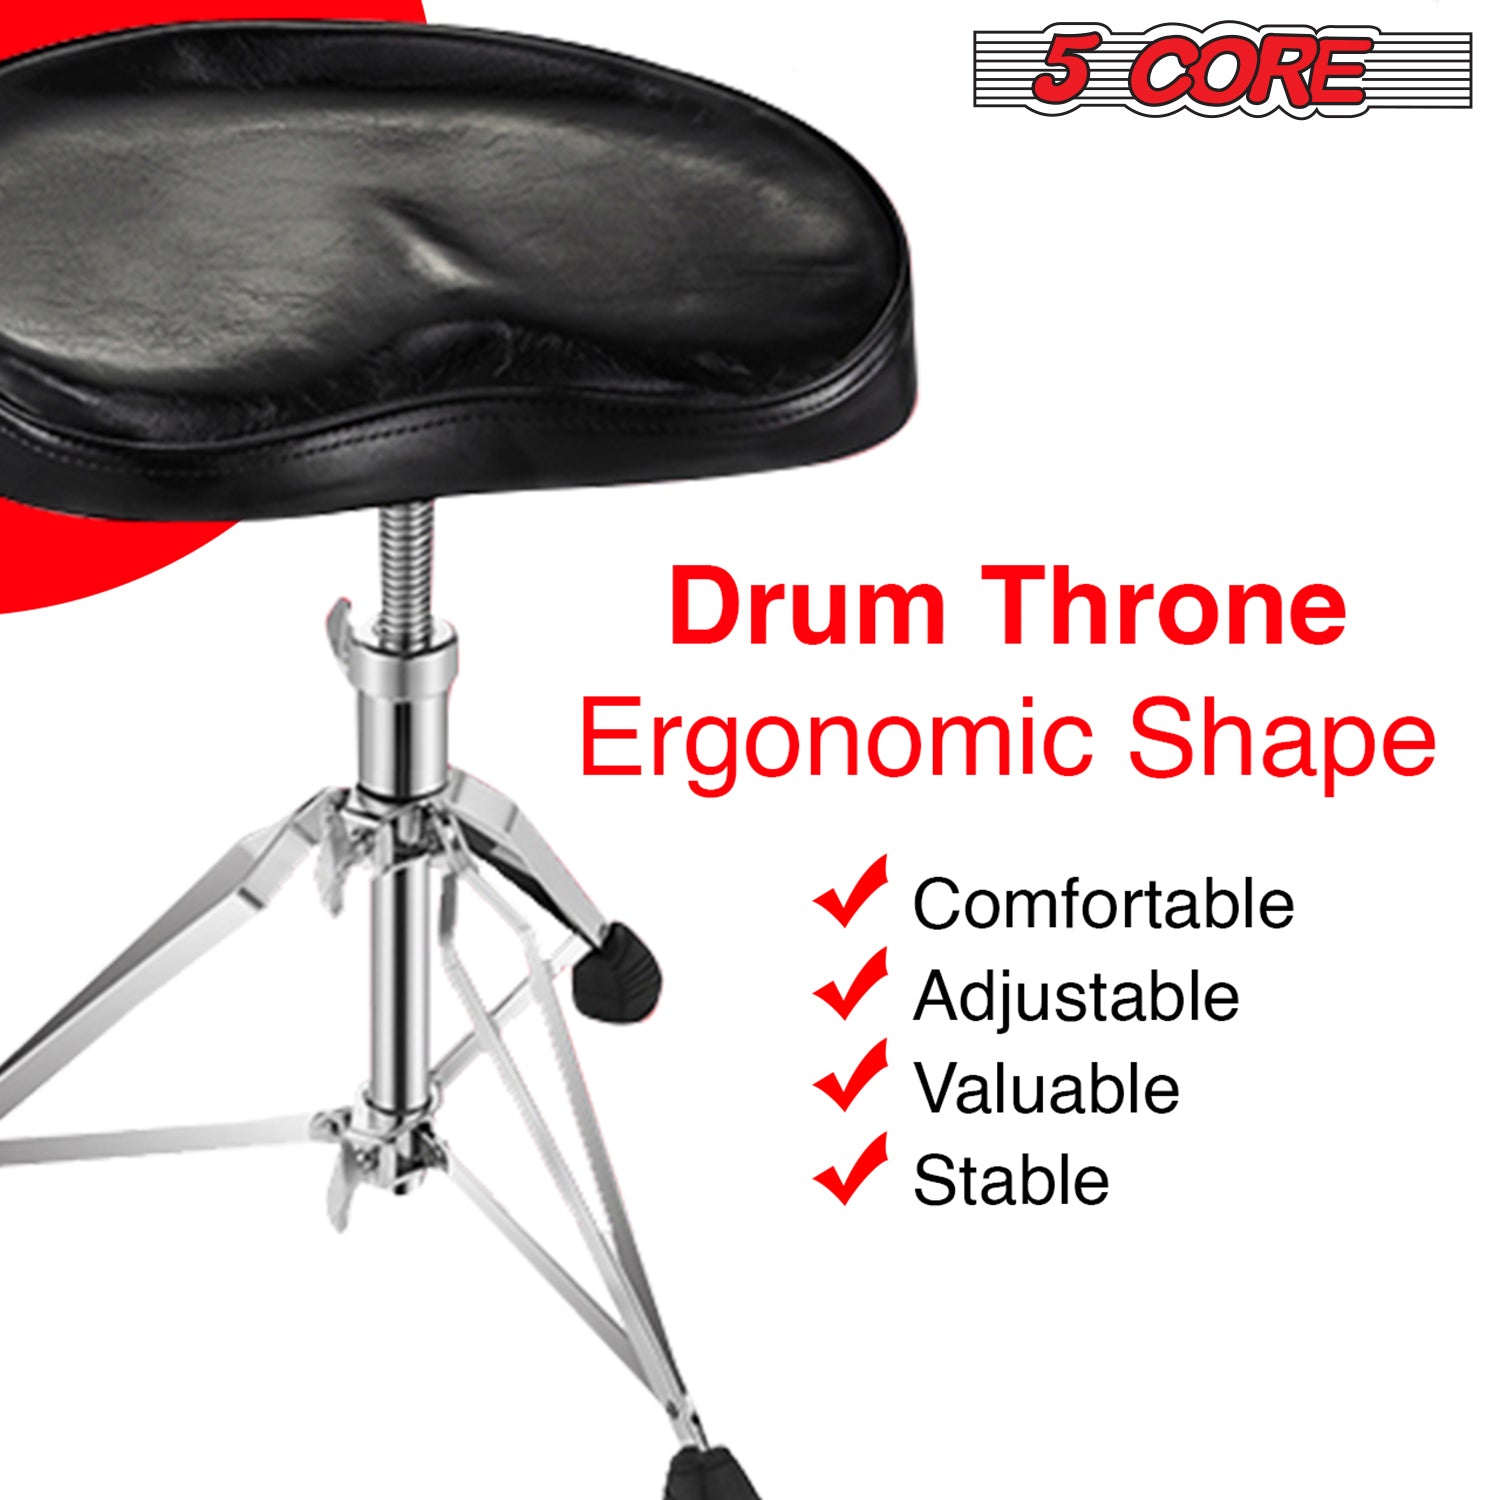 5 Core Drummer's Seat: Durable and comfortable stool designed for extended use.